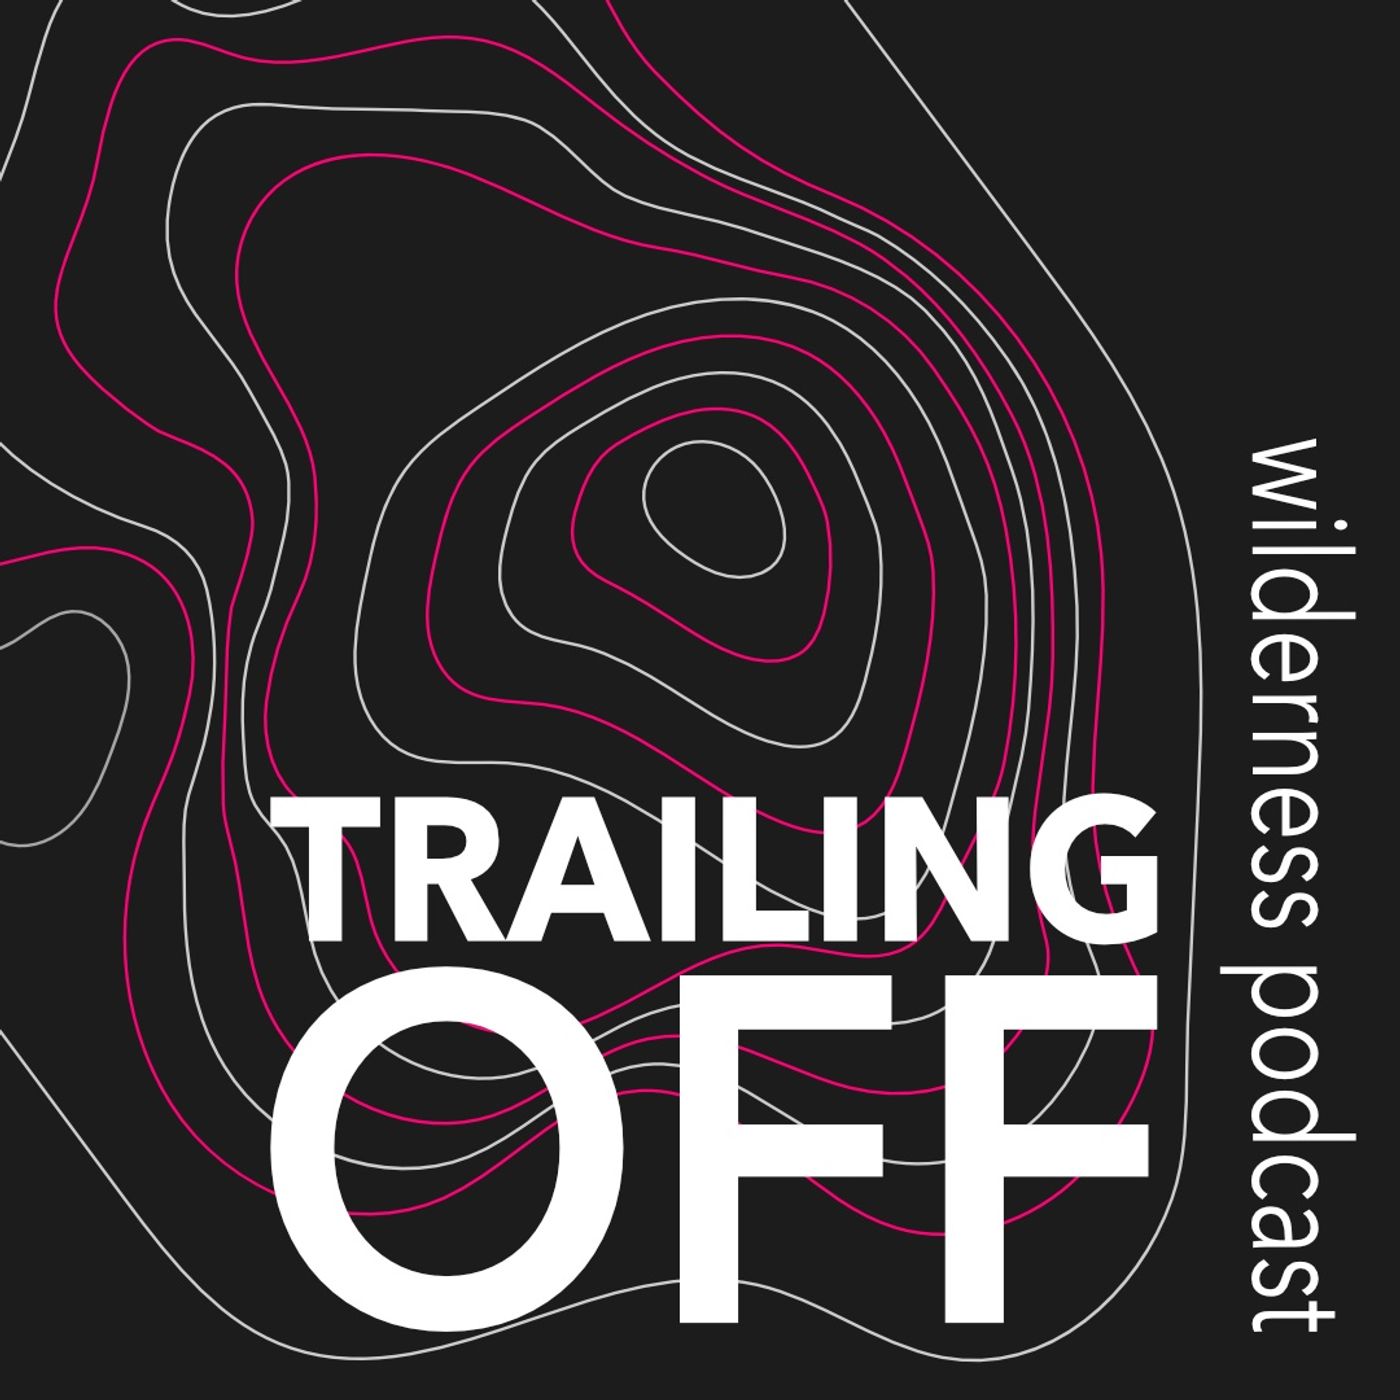 Artwork for podcast TRAILING OFF.wilderness podcast